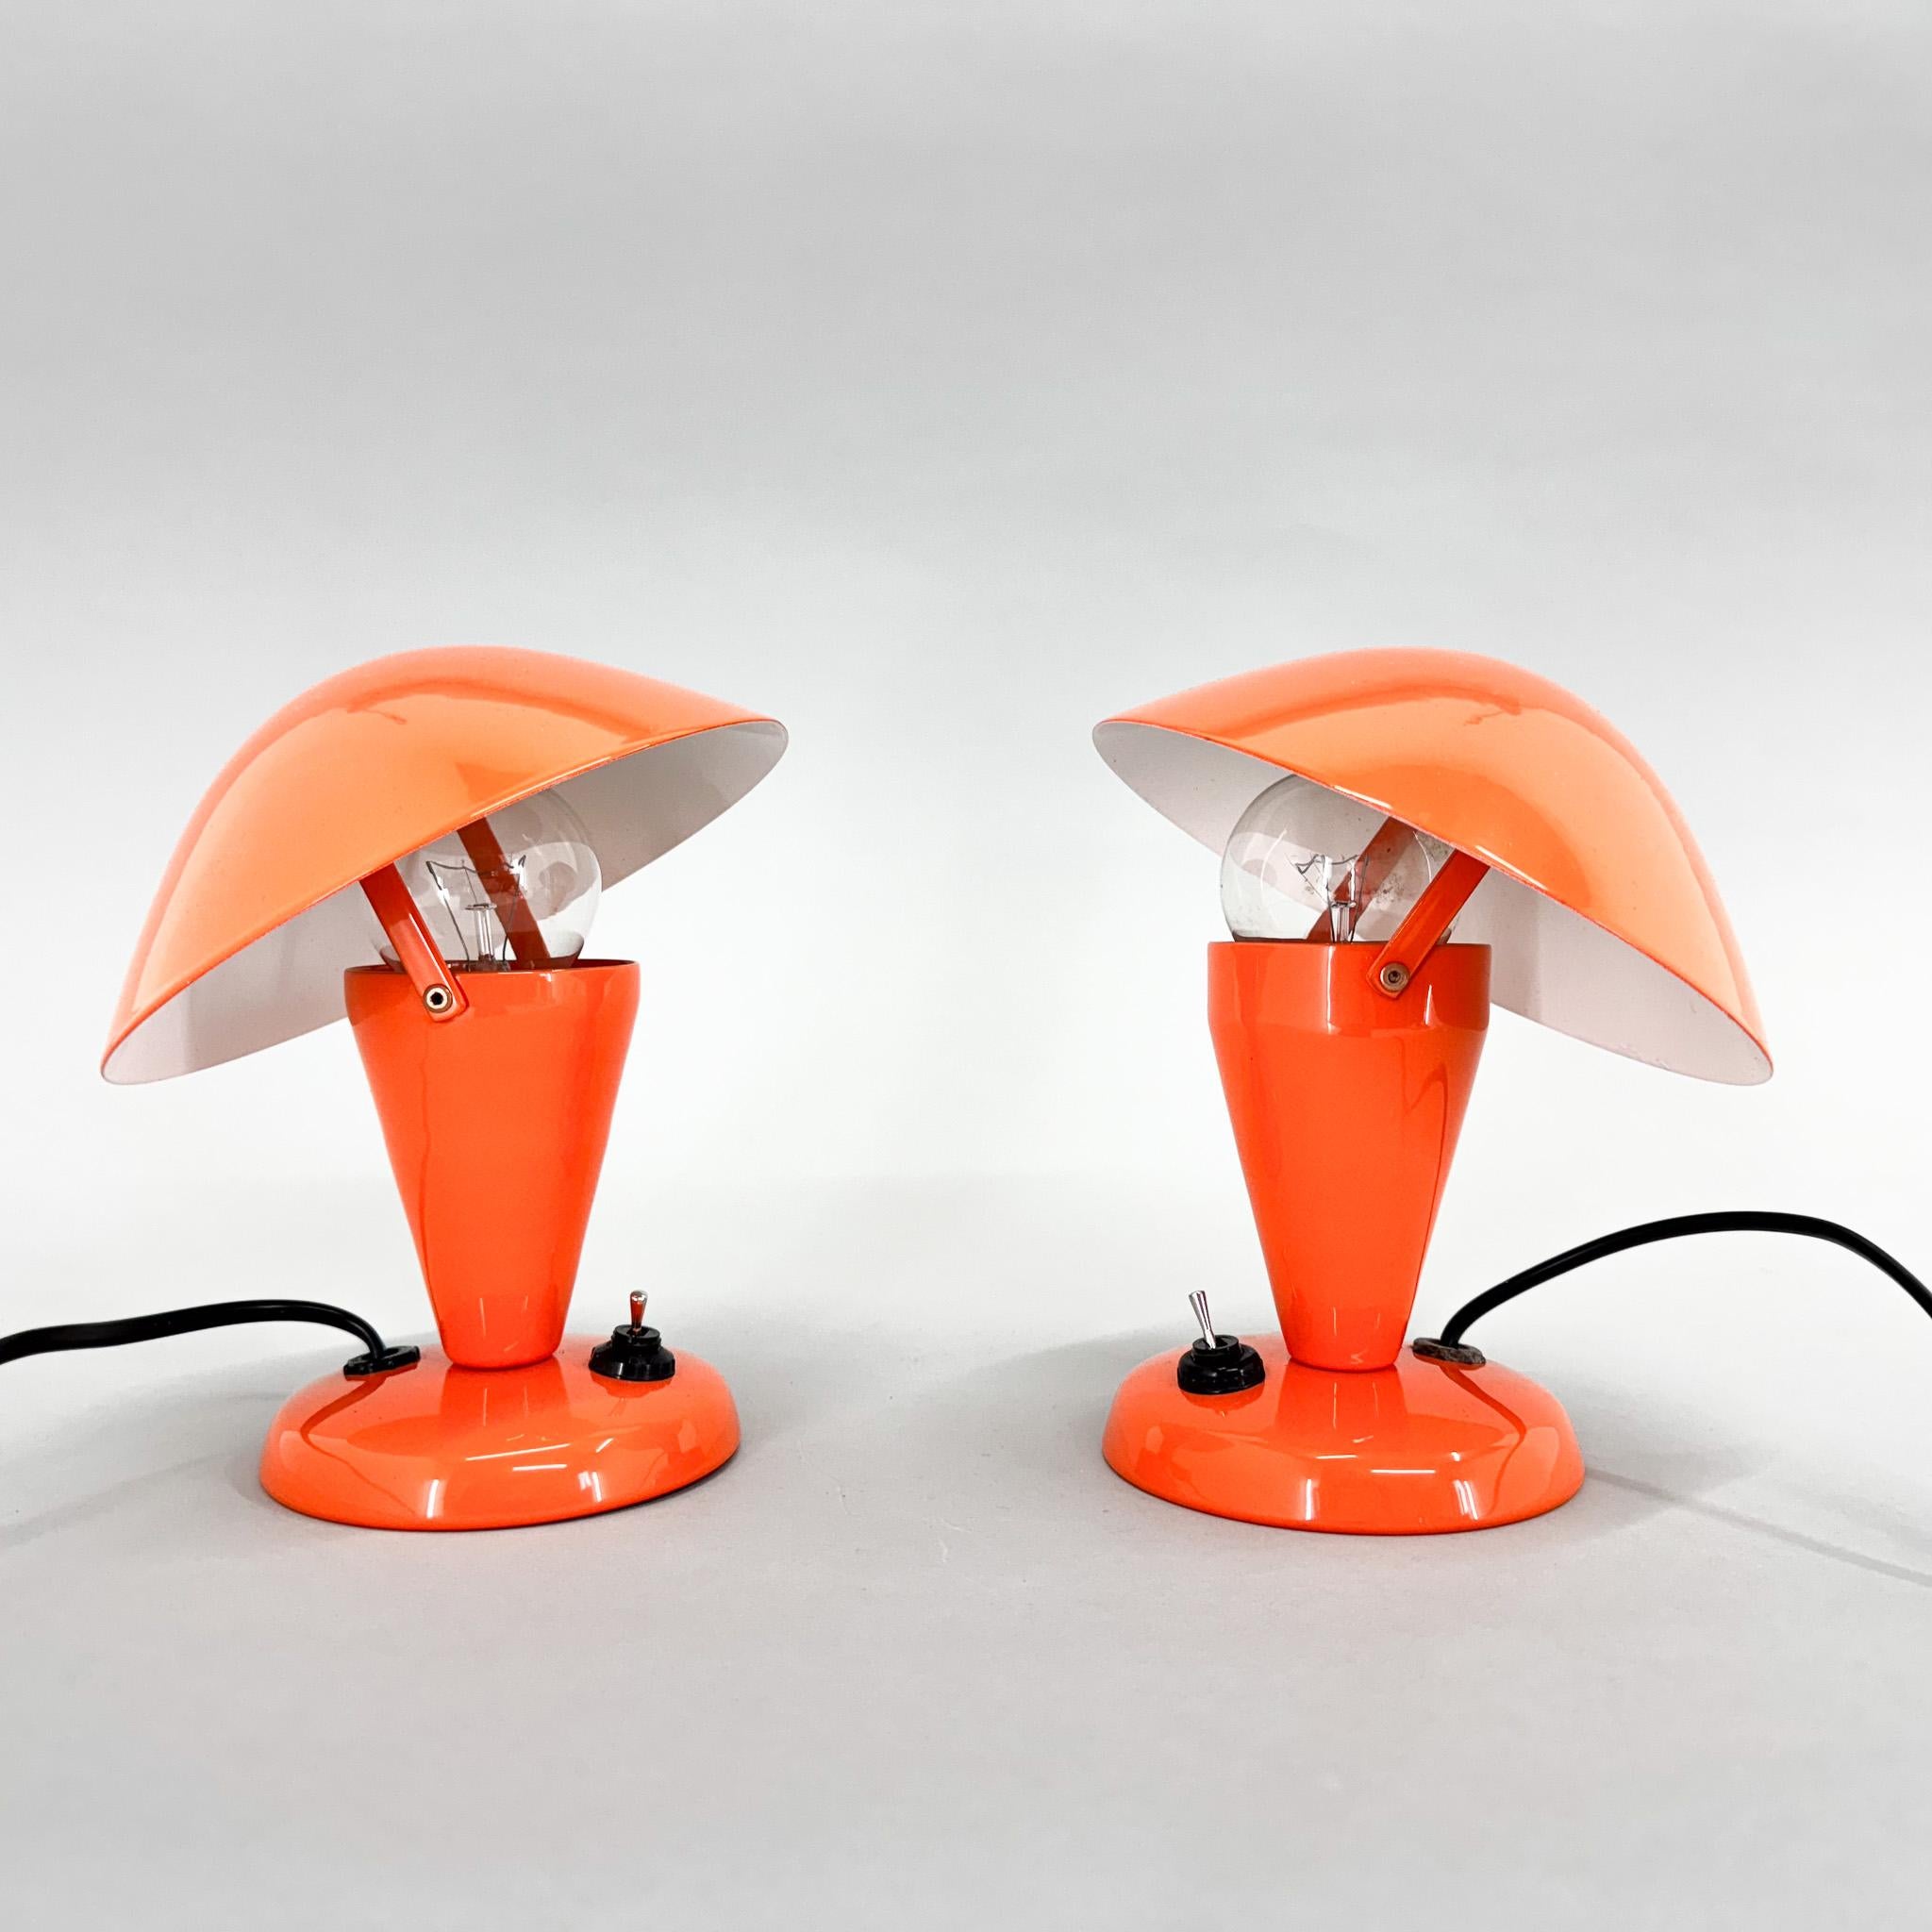 Set of two vintage table or bedside lamps produced in former Czechoslovakia by famous Napako. The lamps were restored, new wiring. Bulb 2 x 1 E26 - E27. US adapter included.